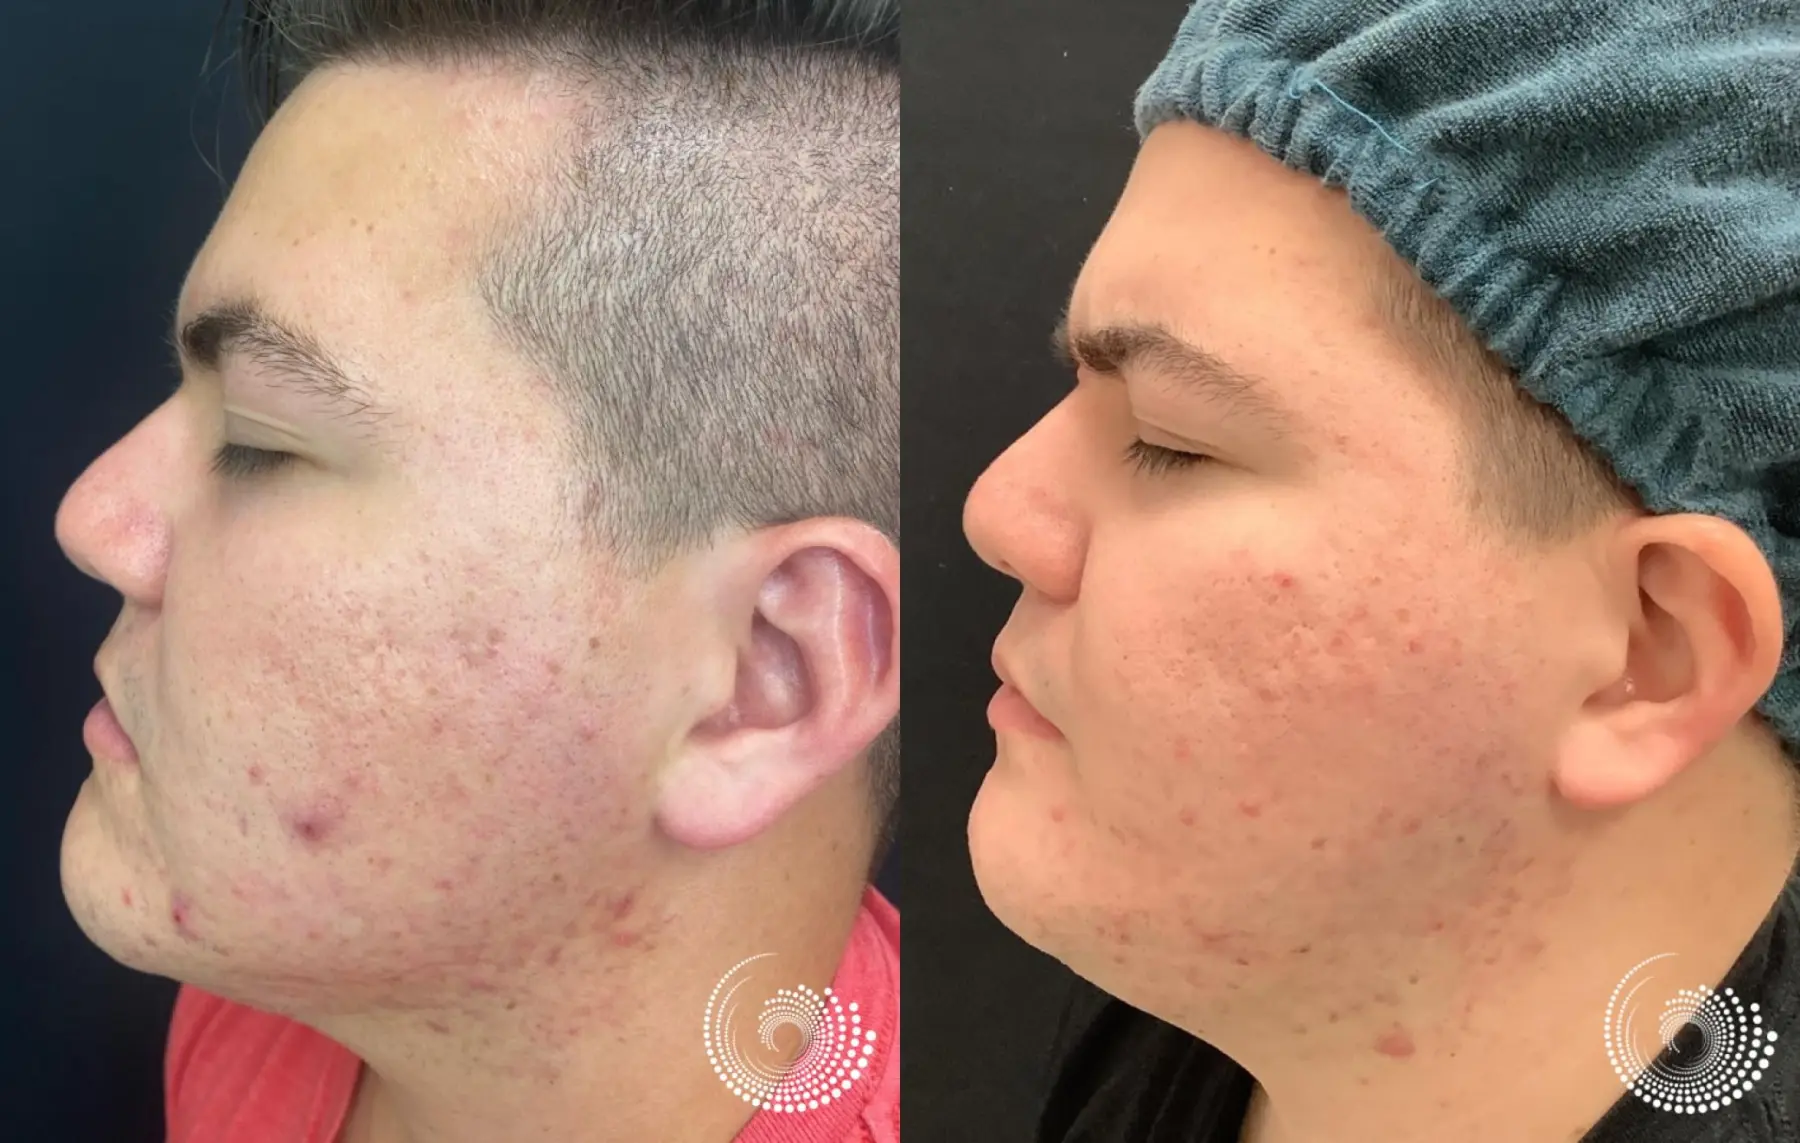 SkinPen Microneedling to smooth acne scars - Before and After 3